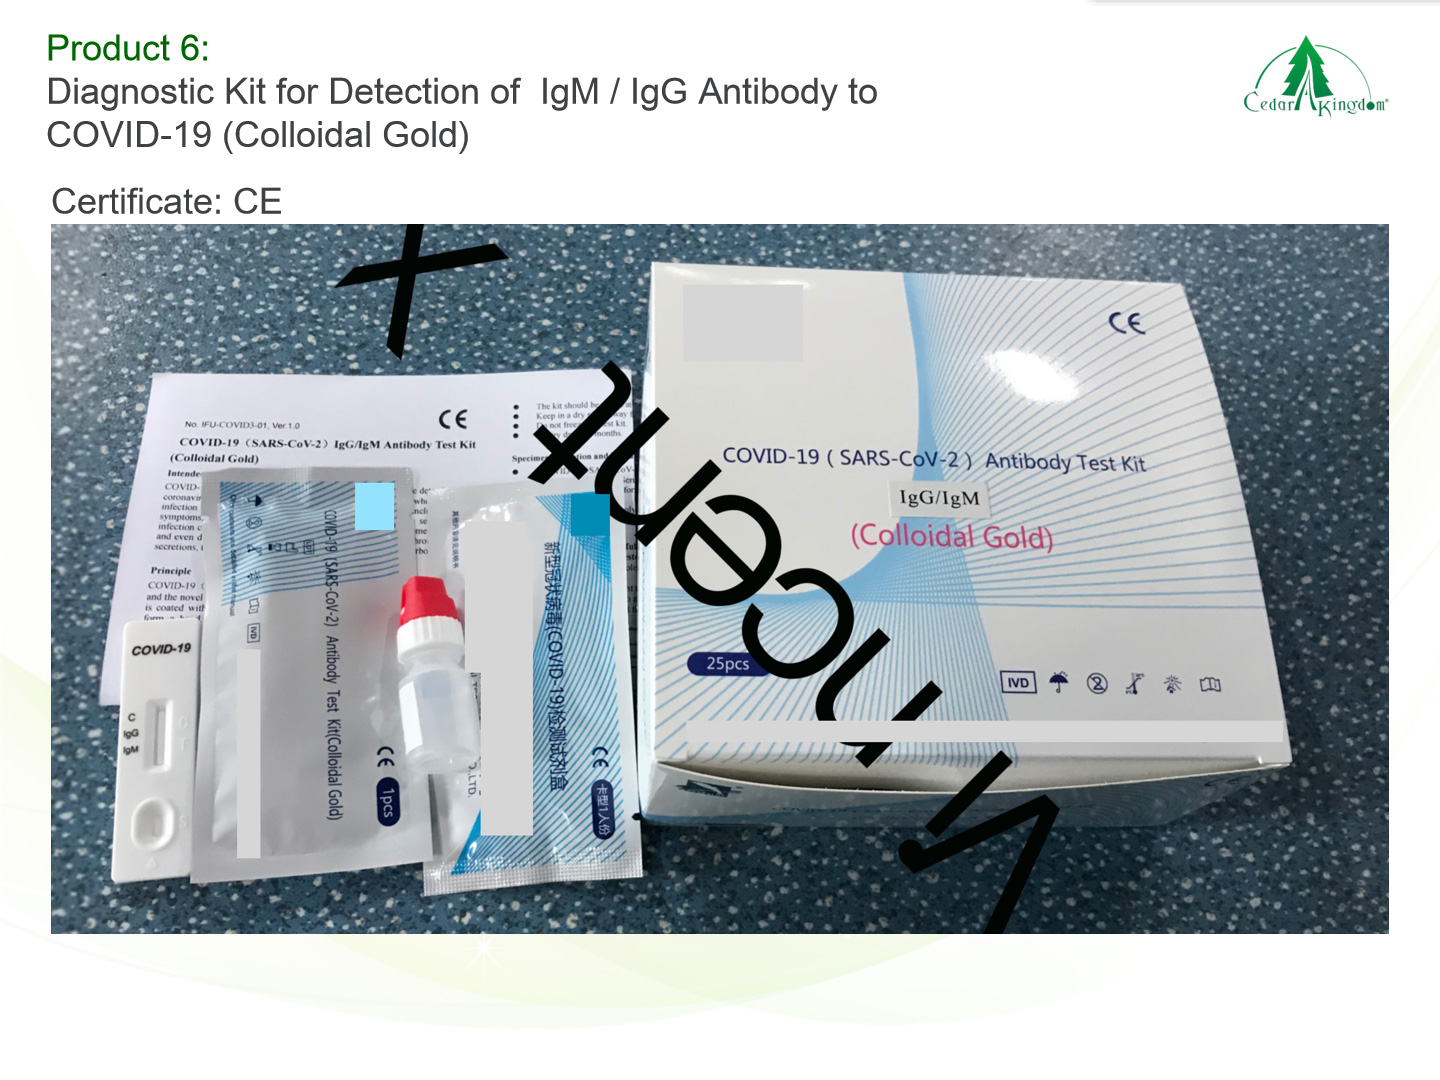 2-Diagnostic-Kit-for-Detection-of-IgM-IgG-Antibody-to-COVID-19-Colloidal-Gold